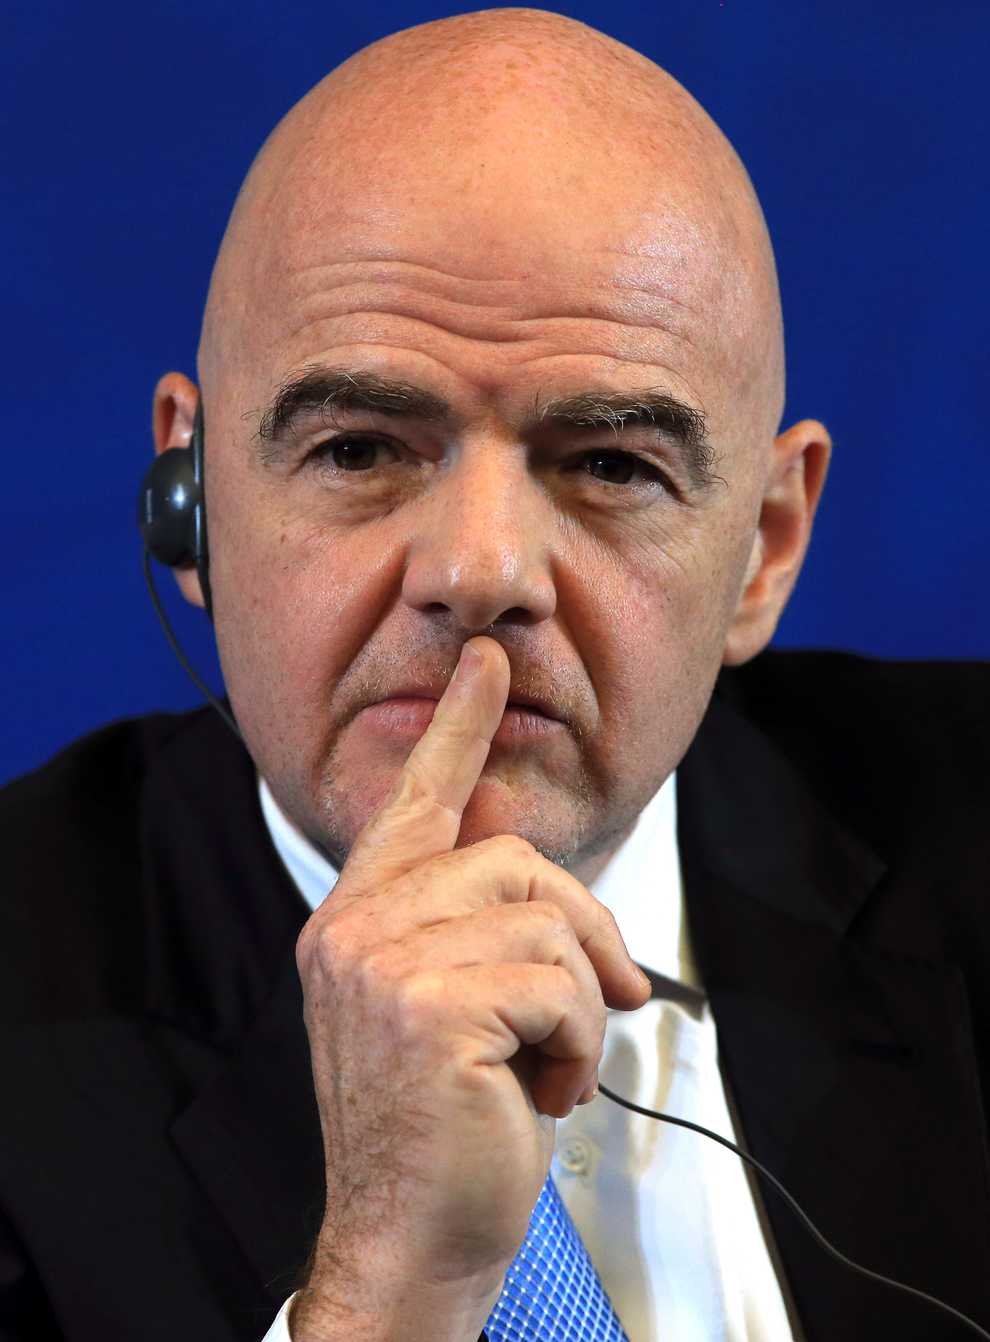 FIFA president Gianni Infantino is the subject of criminal proceedings